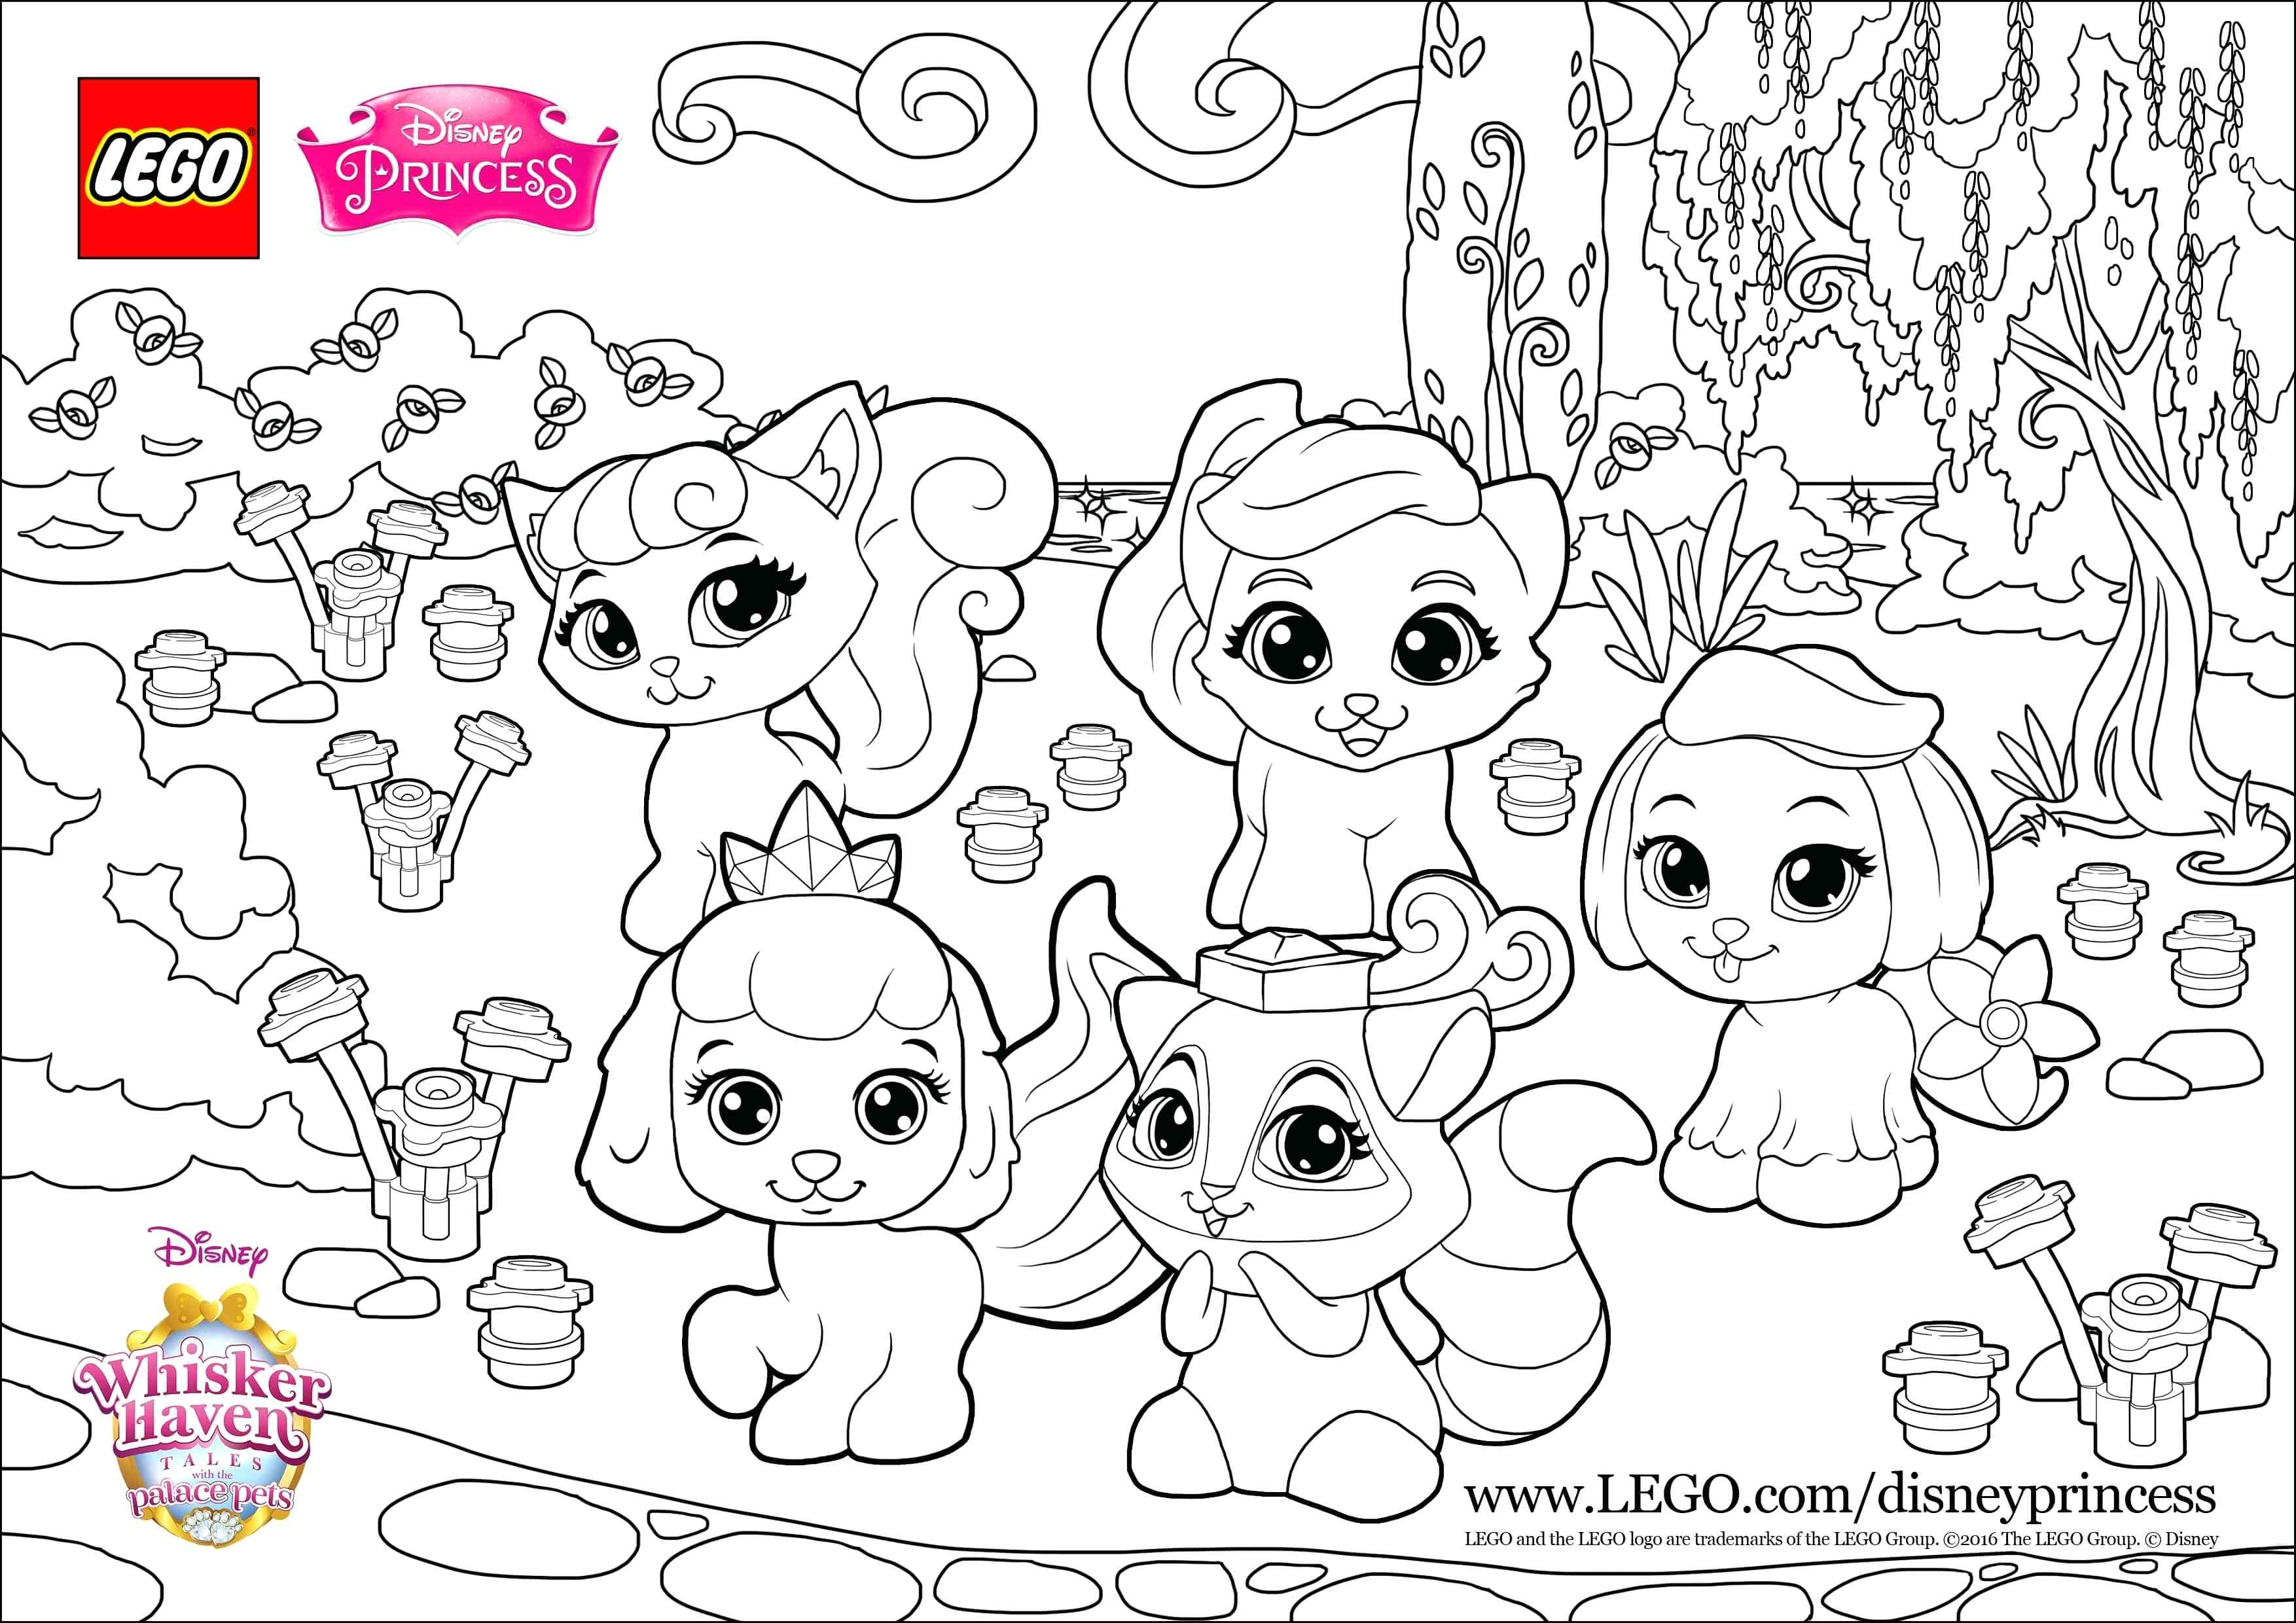 Lego Friends Printable Coloring Pages Coloring Book Lego Friendsing Pages To Print Free Book Movie